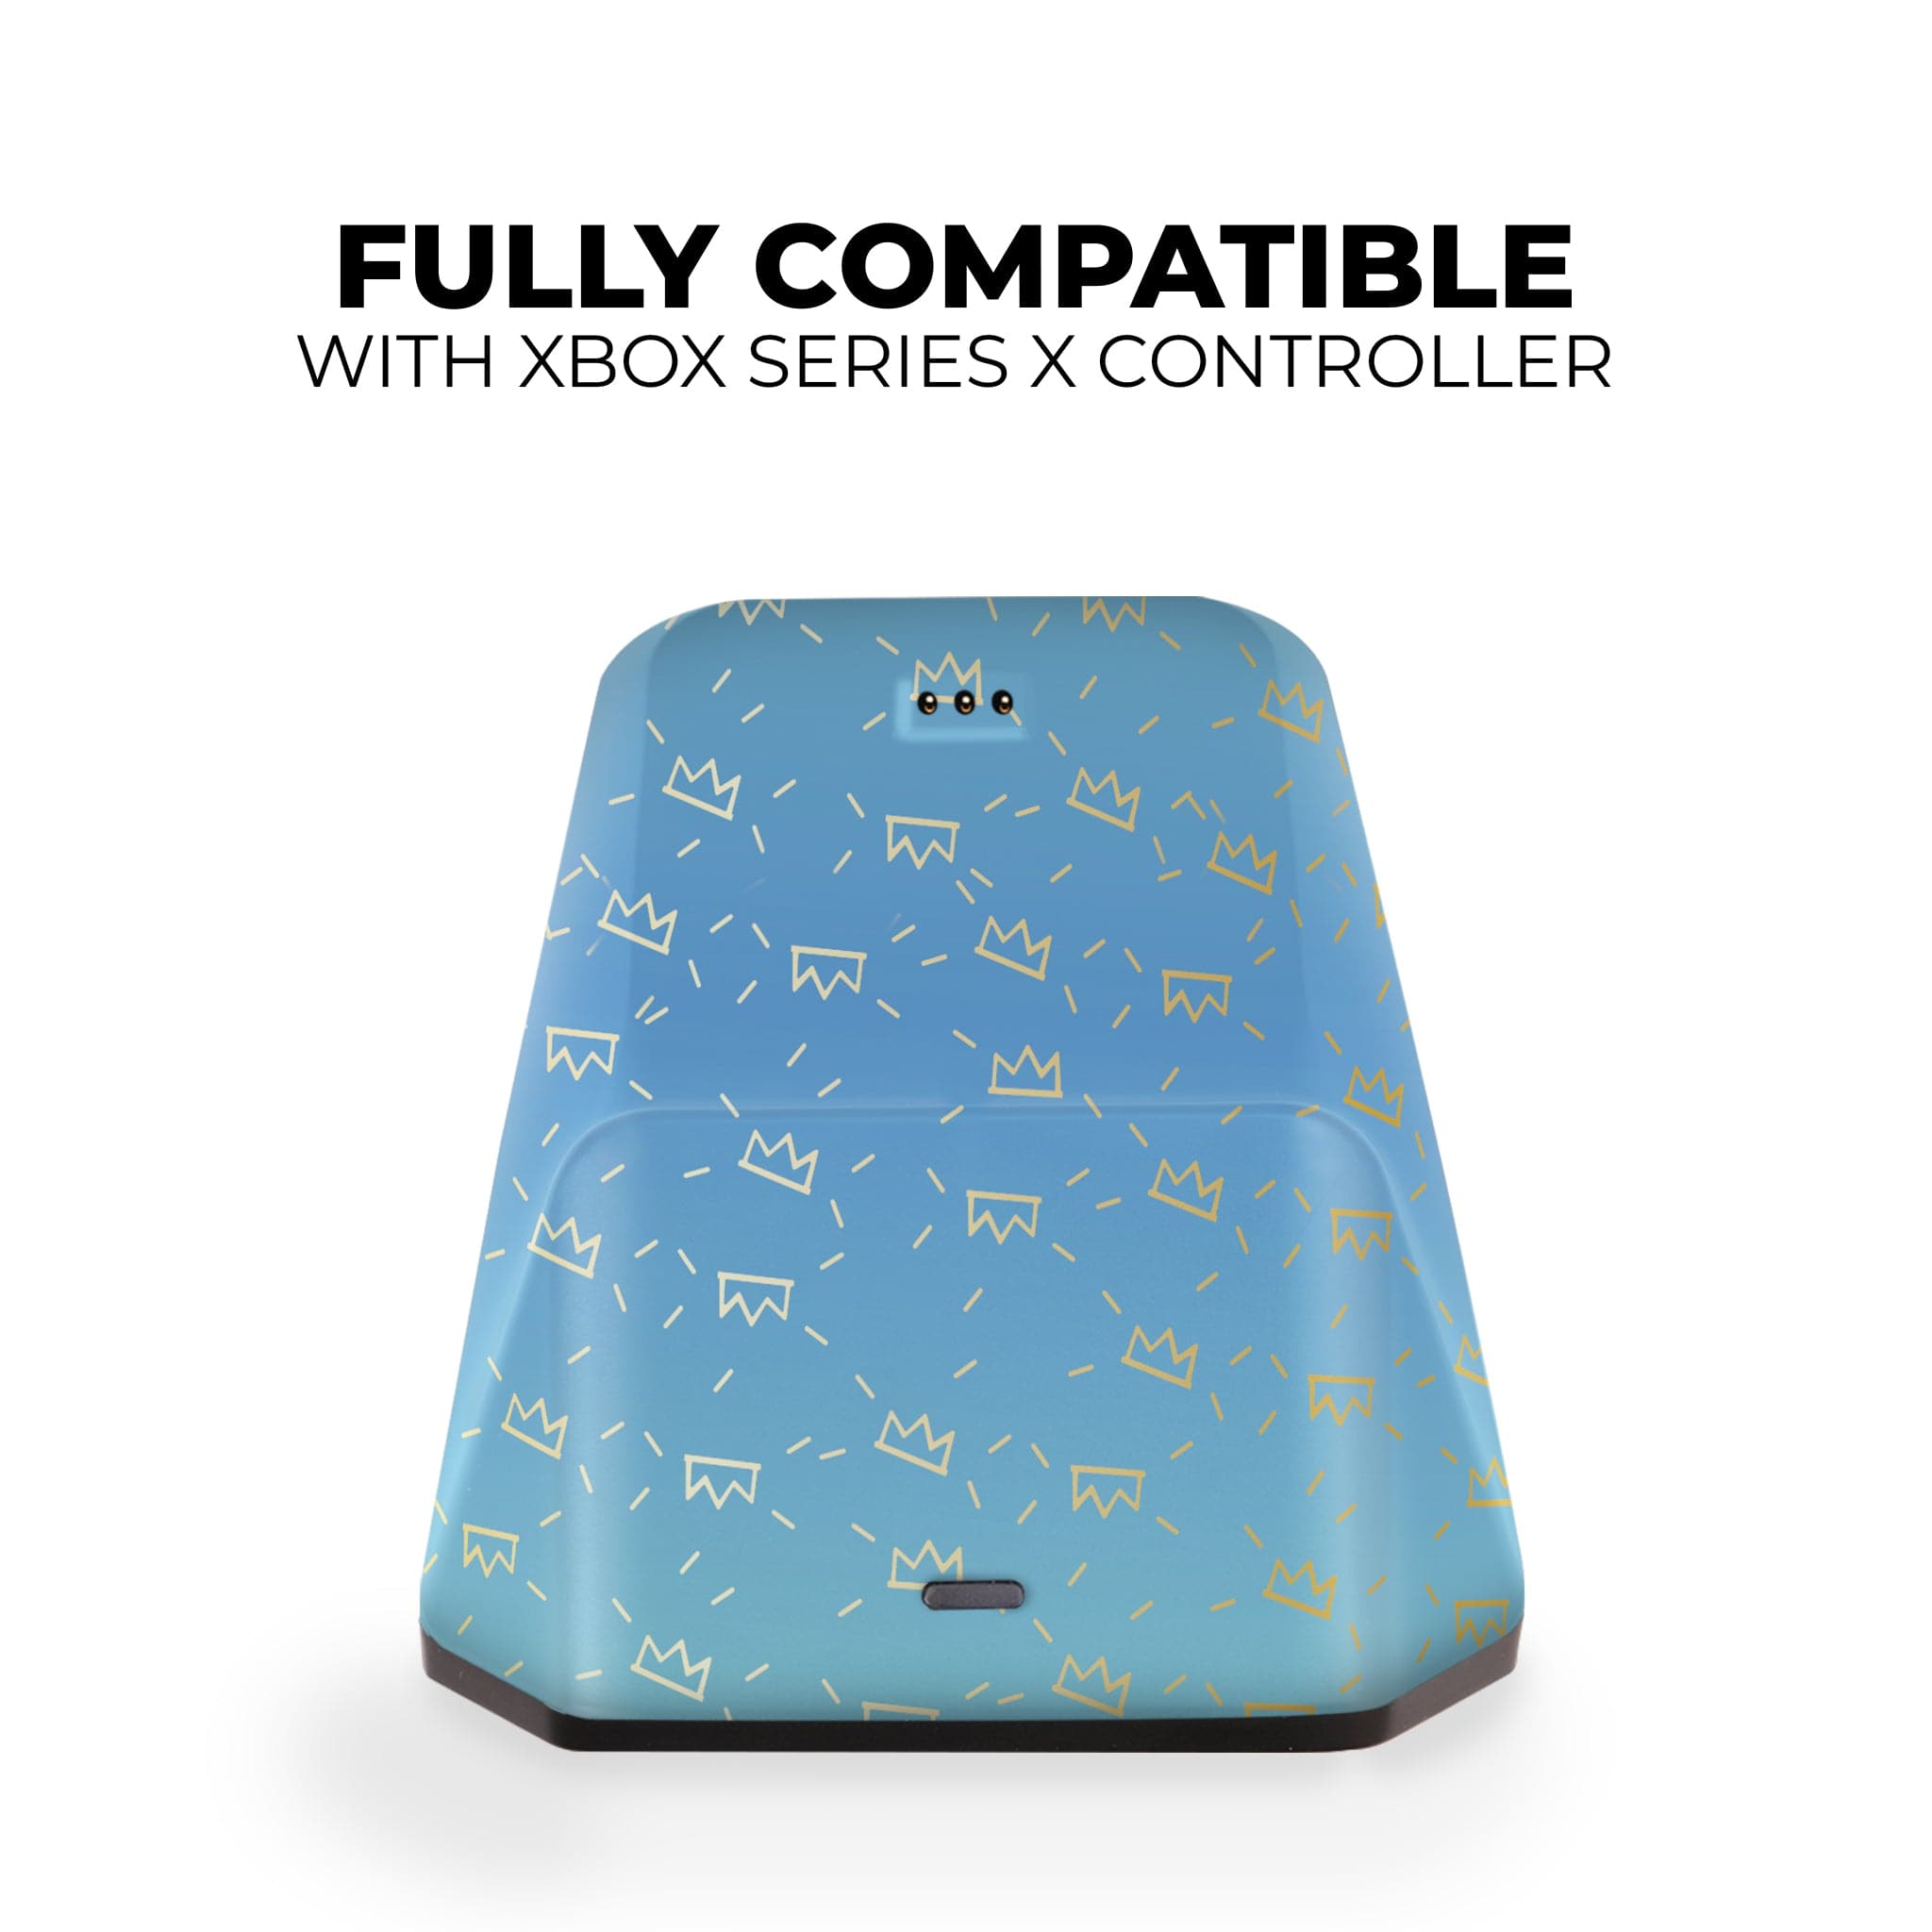 Fall Guy Inspired Xbox Series X Controller with Charging Station | Best Buy Xbox Series X